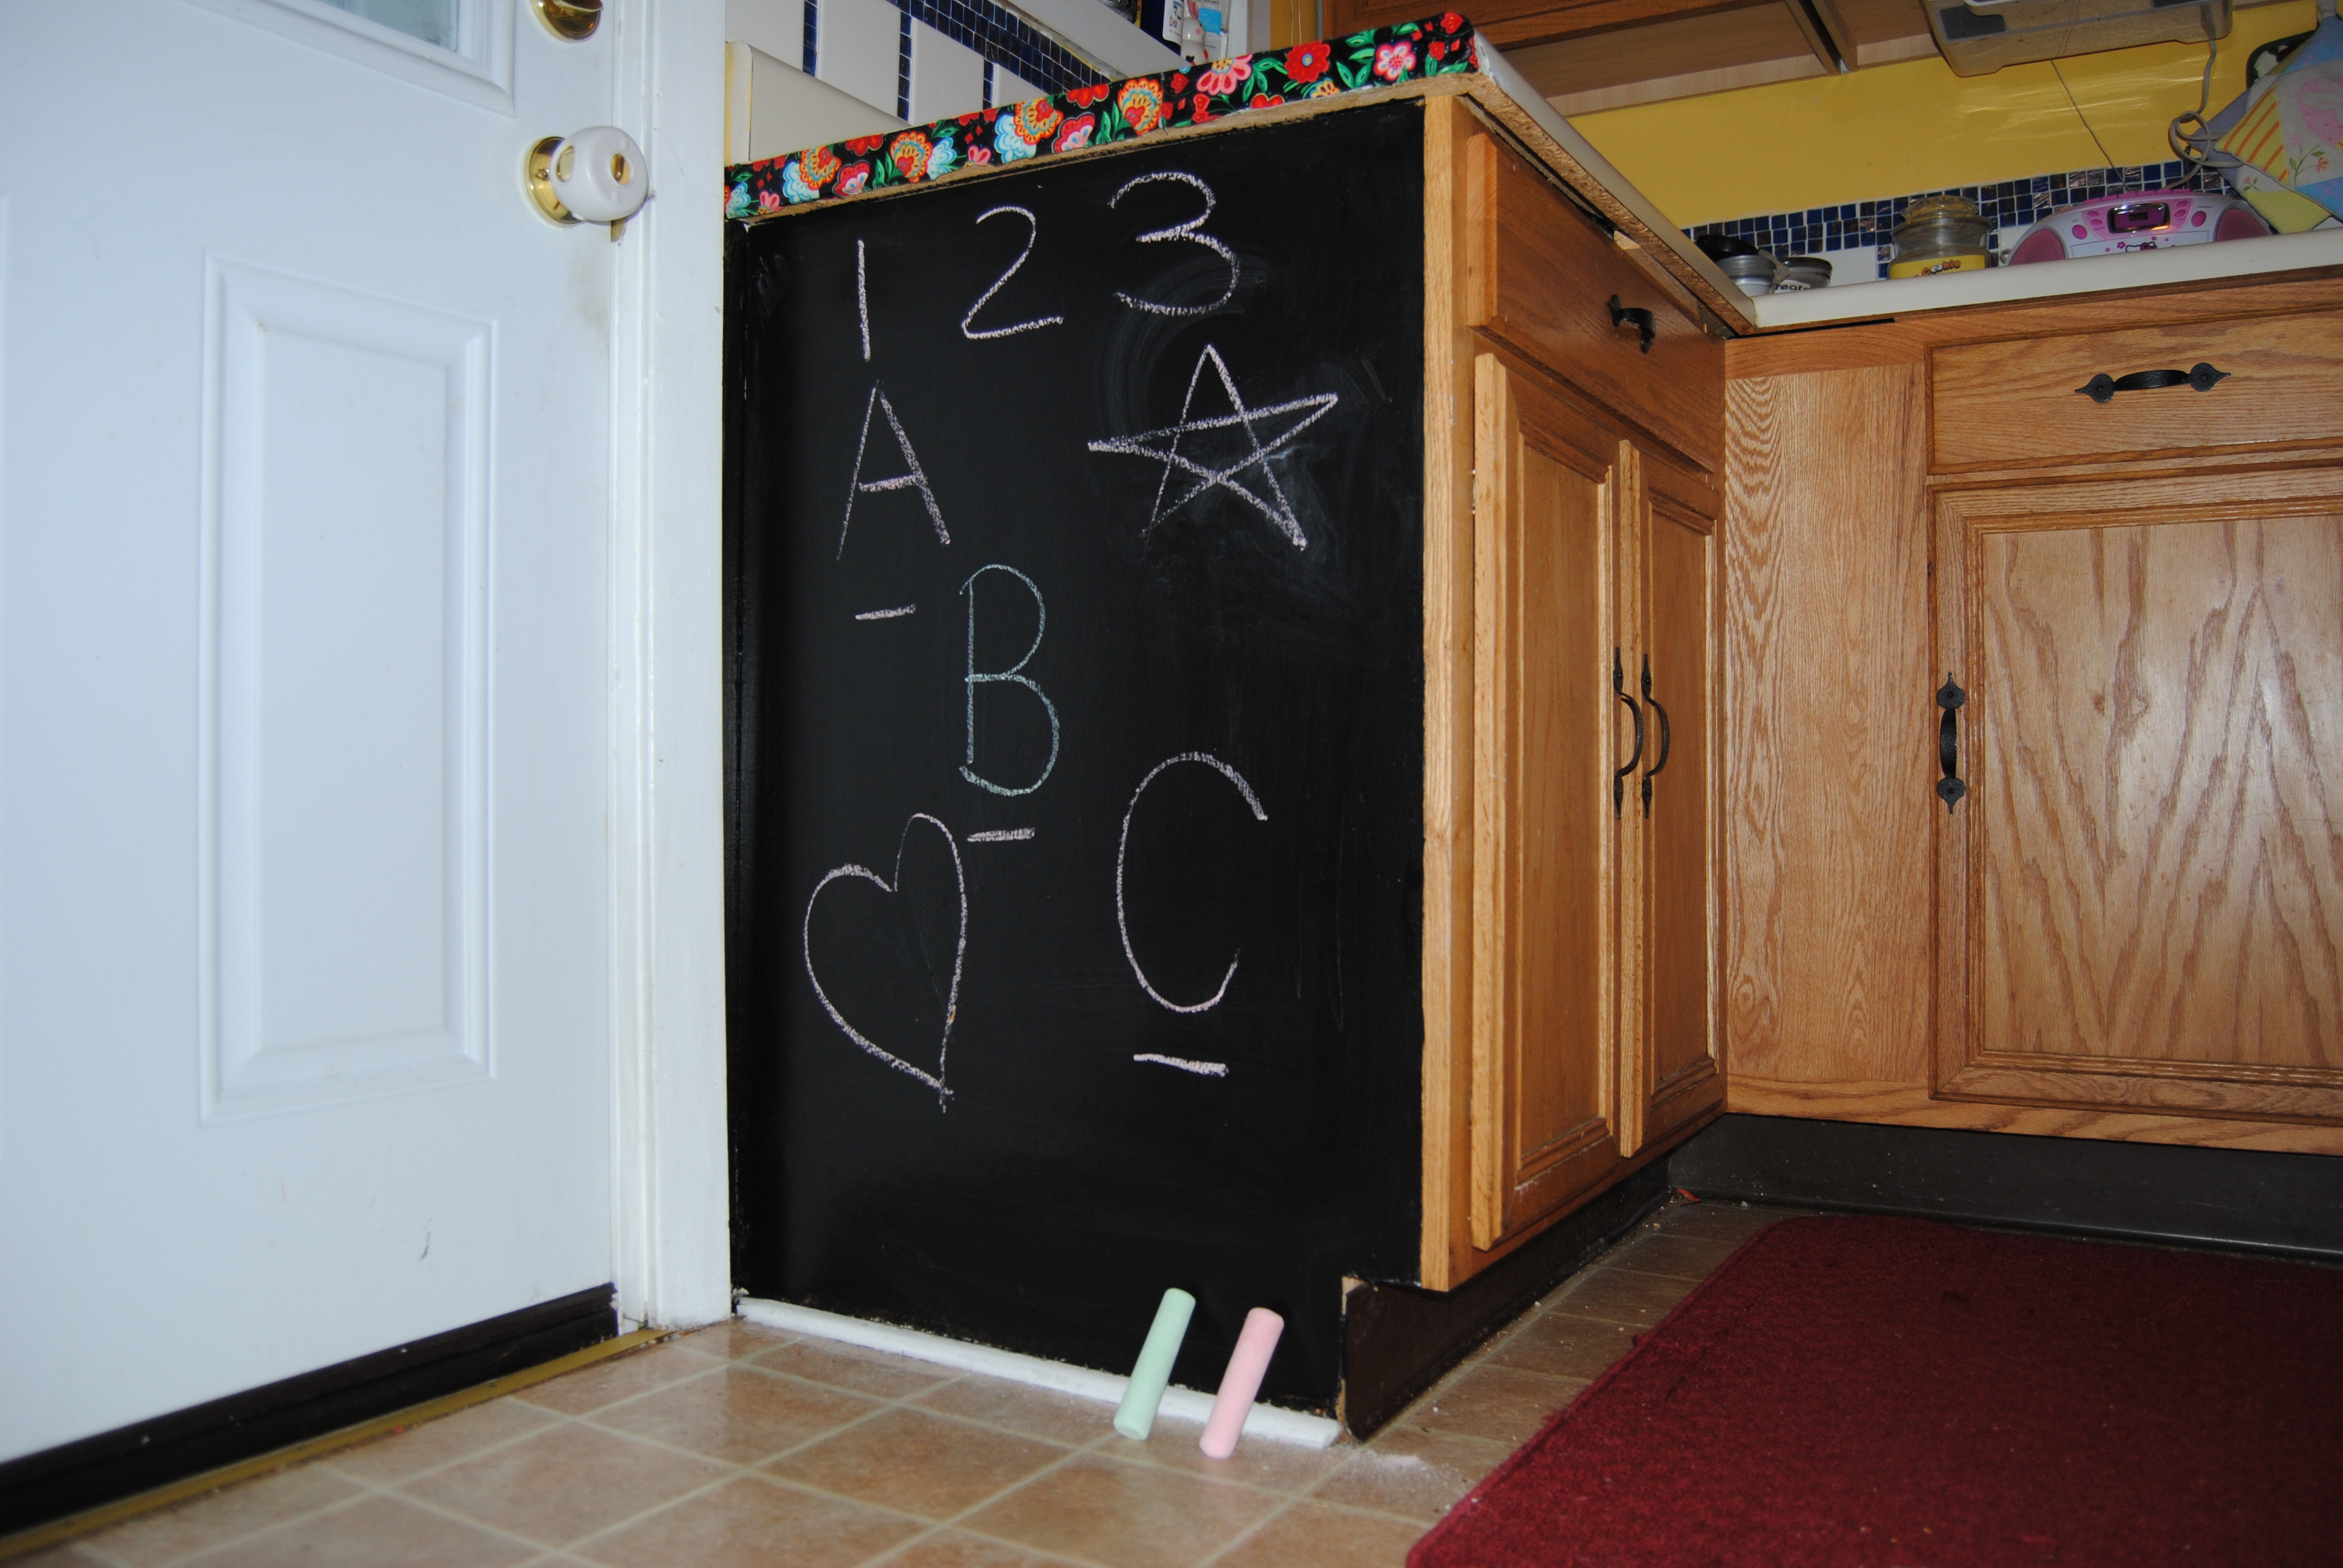 Painting the Kitchen in Chalkboard Paint